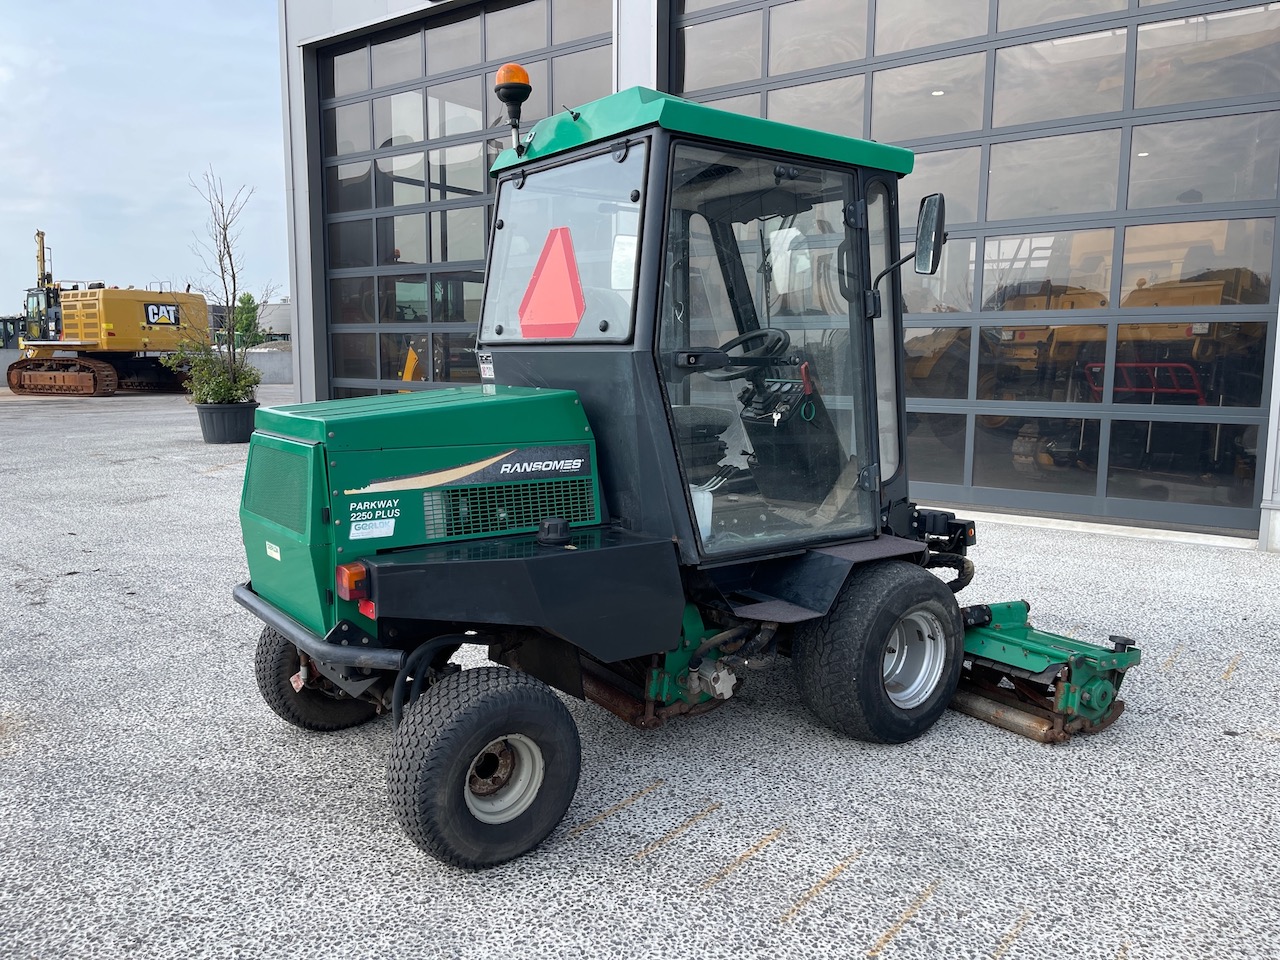 Ransomes Parkway 2250 Plus 0